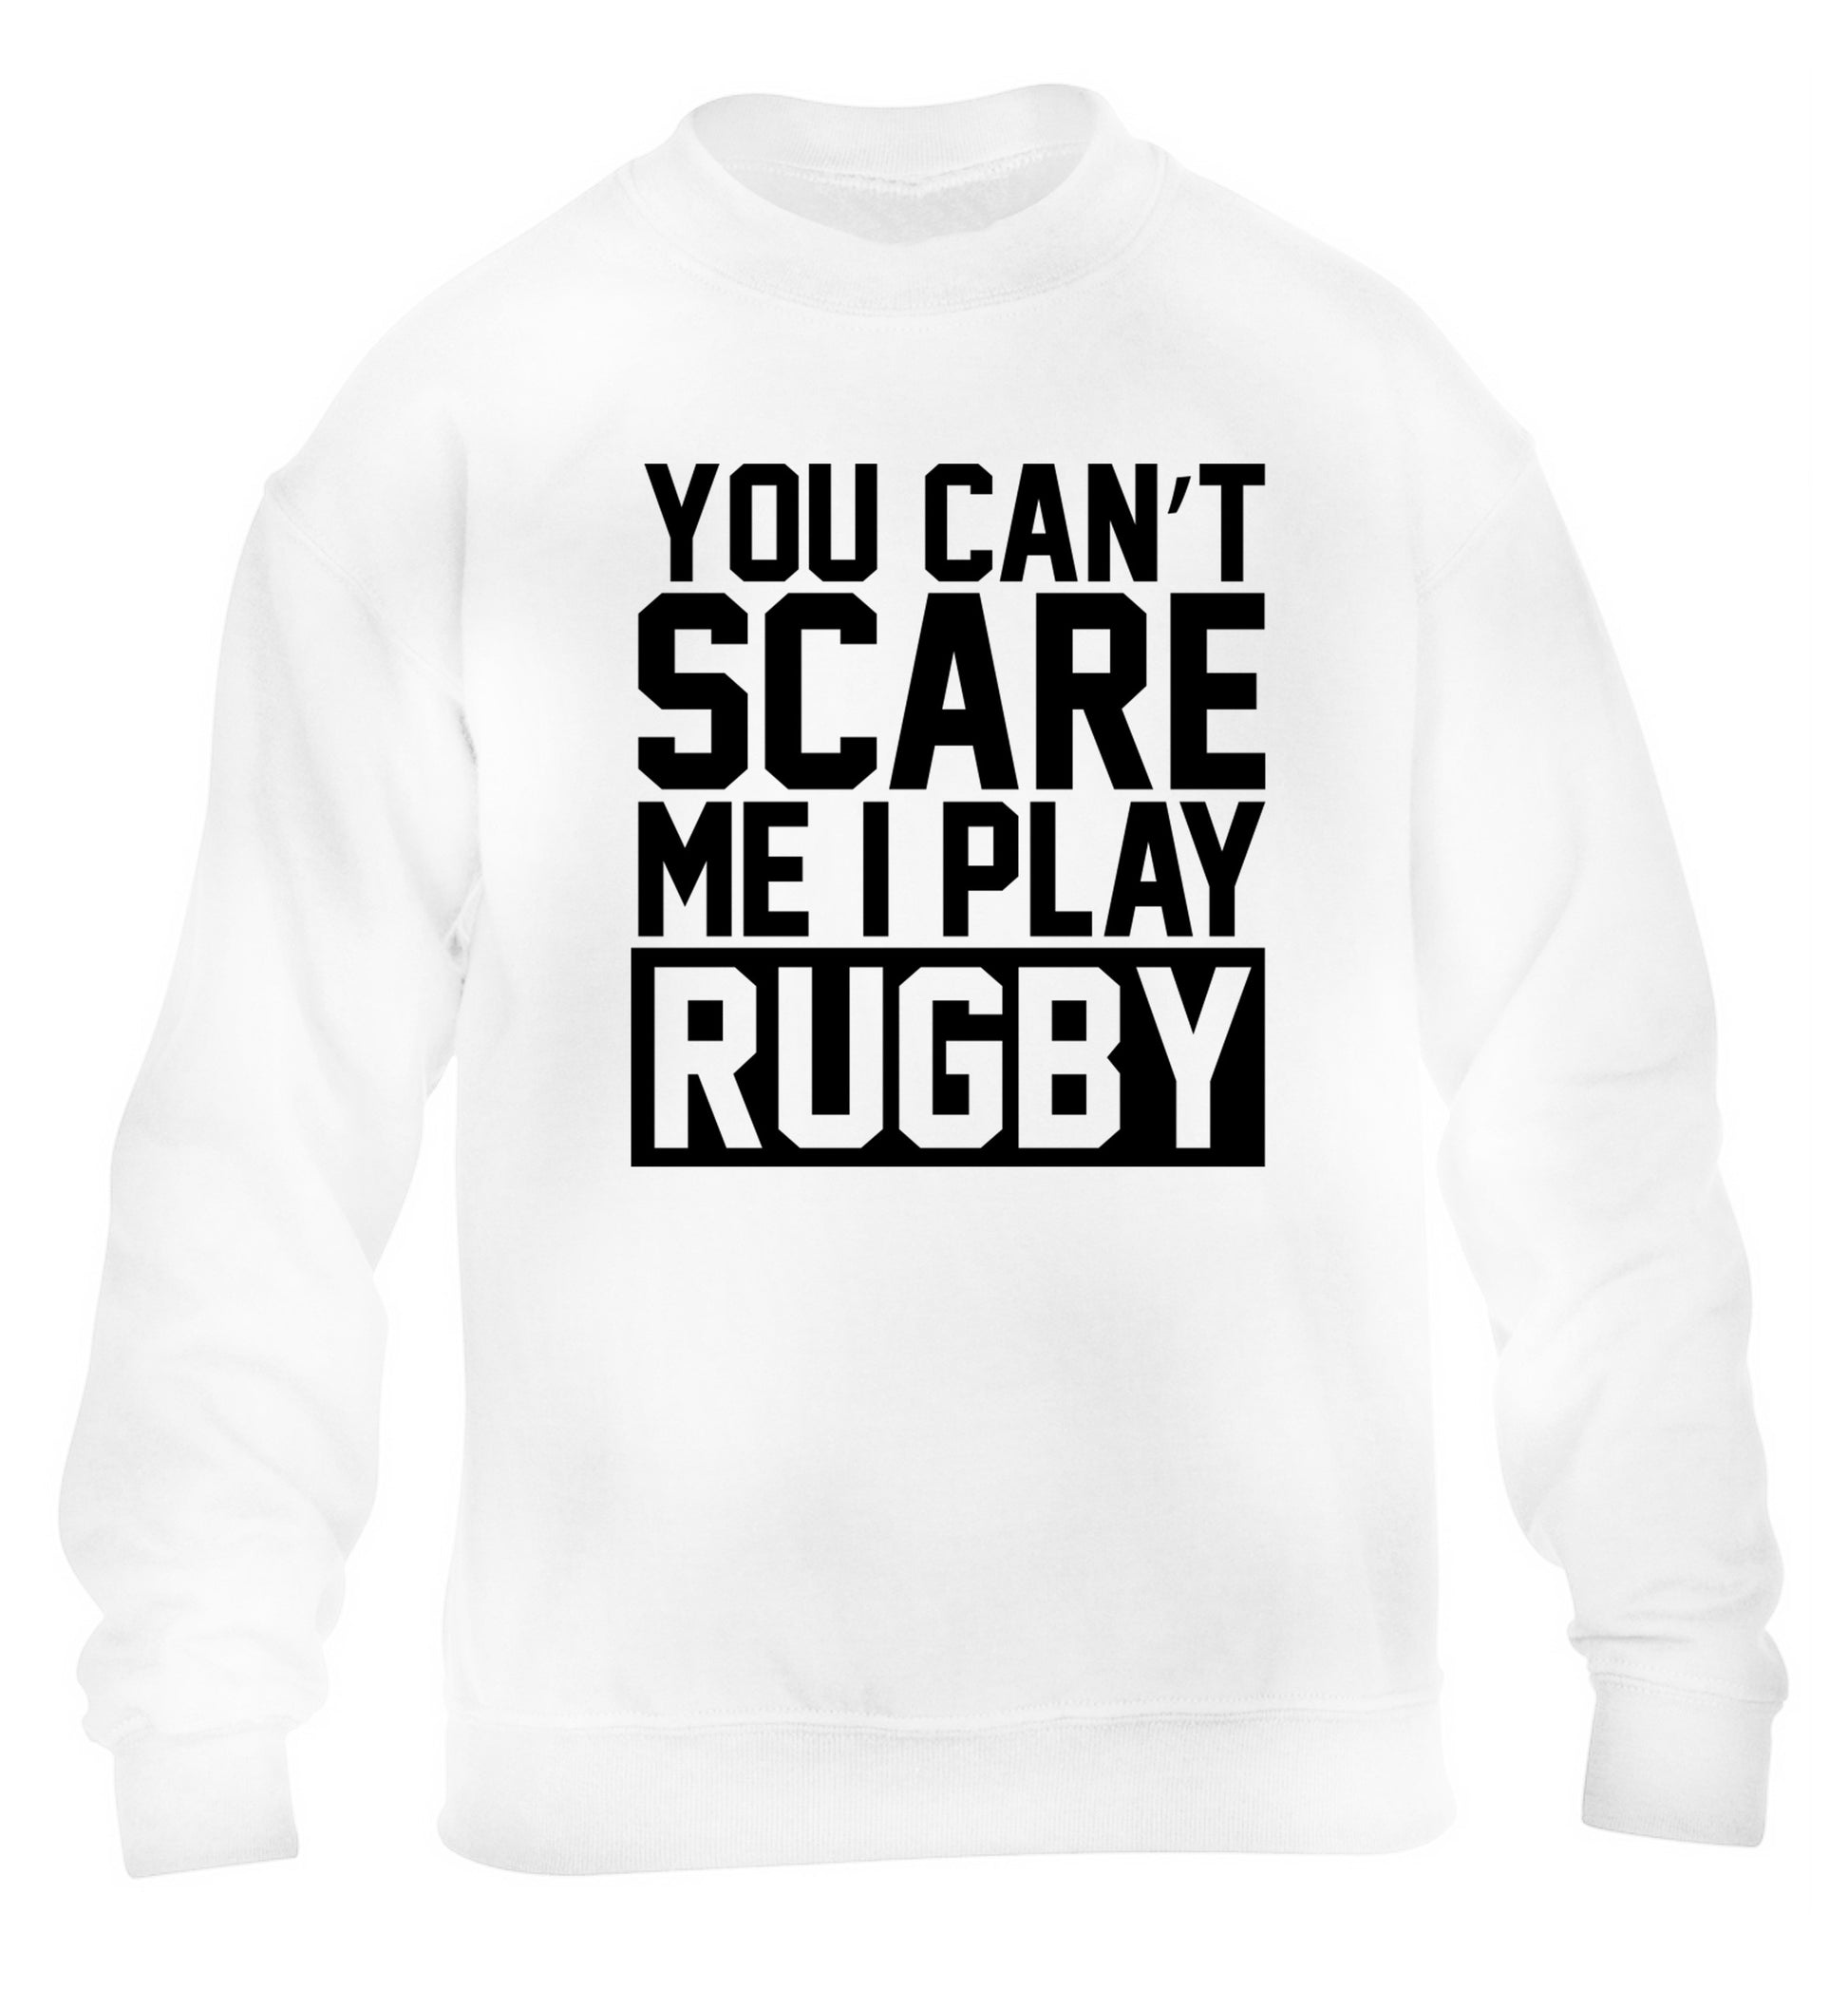 You can't scare me I play rugby children's white sweater 12-14 Years